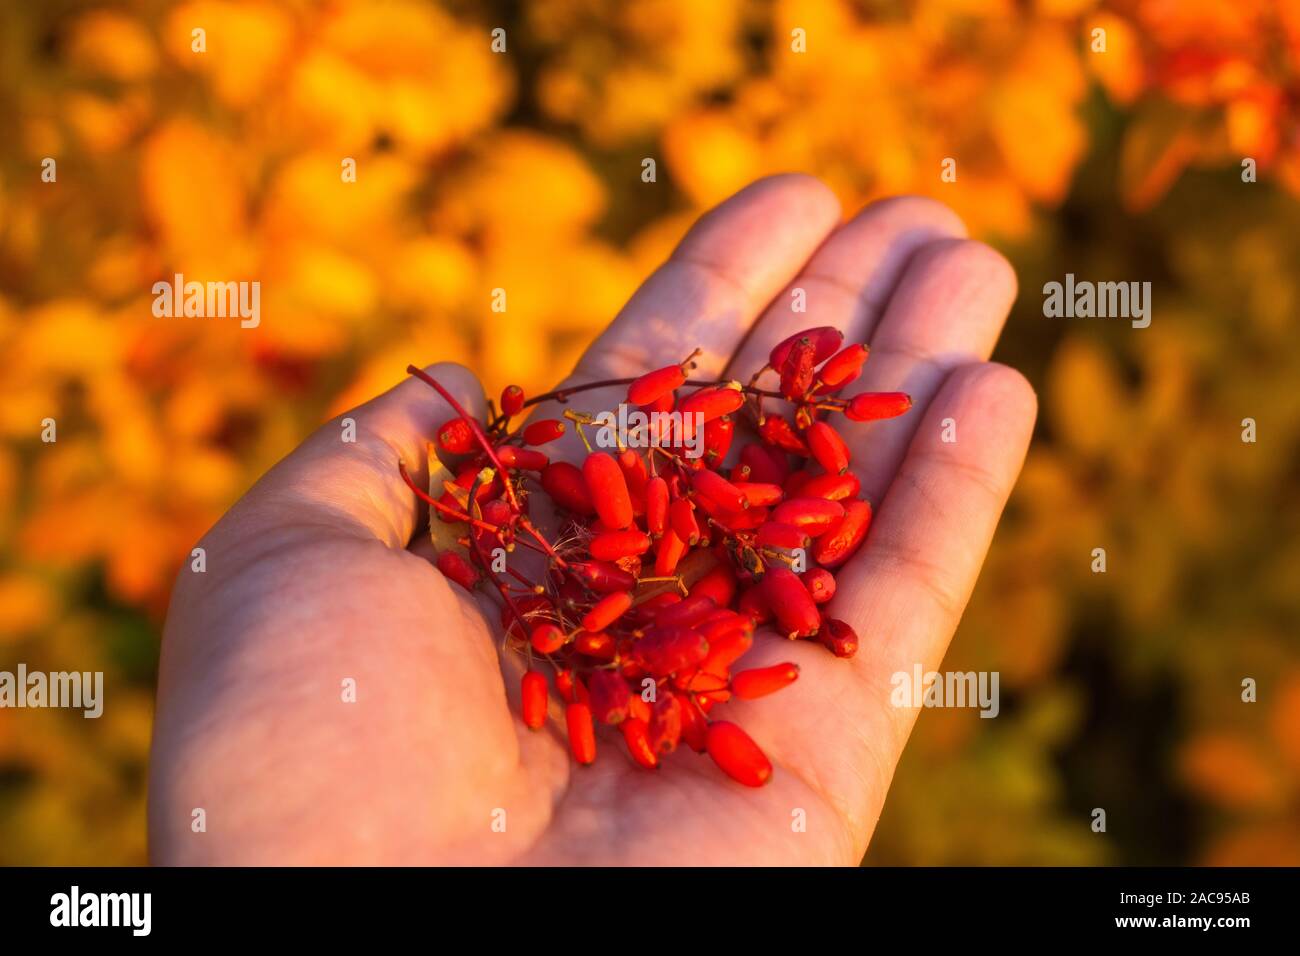 red barberry berries close-up, harvest of useful berries Stock Photo